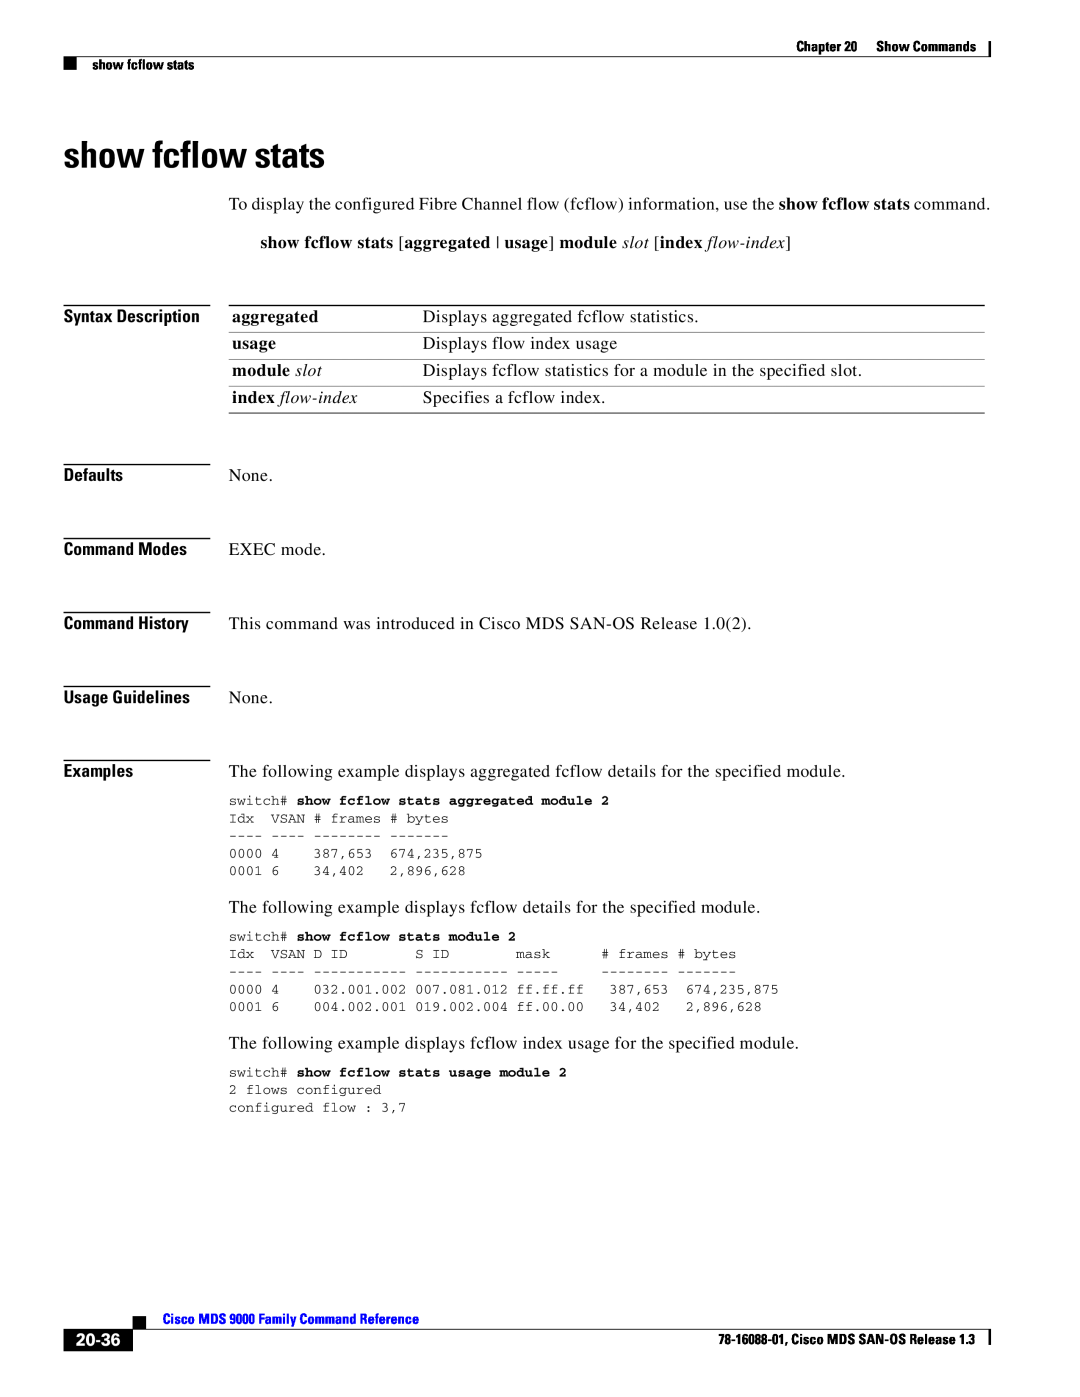 Cisco Systems MDS 9000 show fcflow stats aggregated usage module slot index flow-index, 20-36, Defaults, Command Modes 